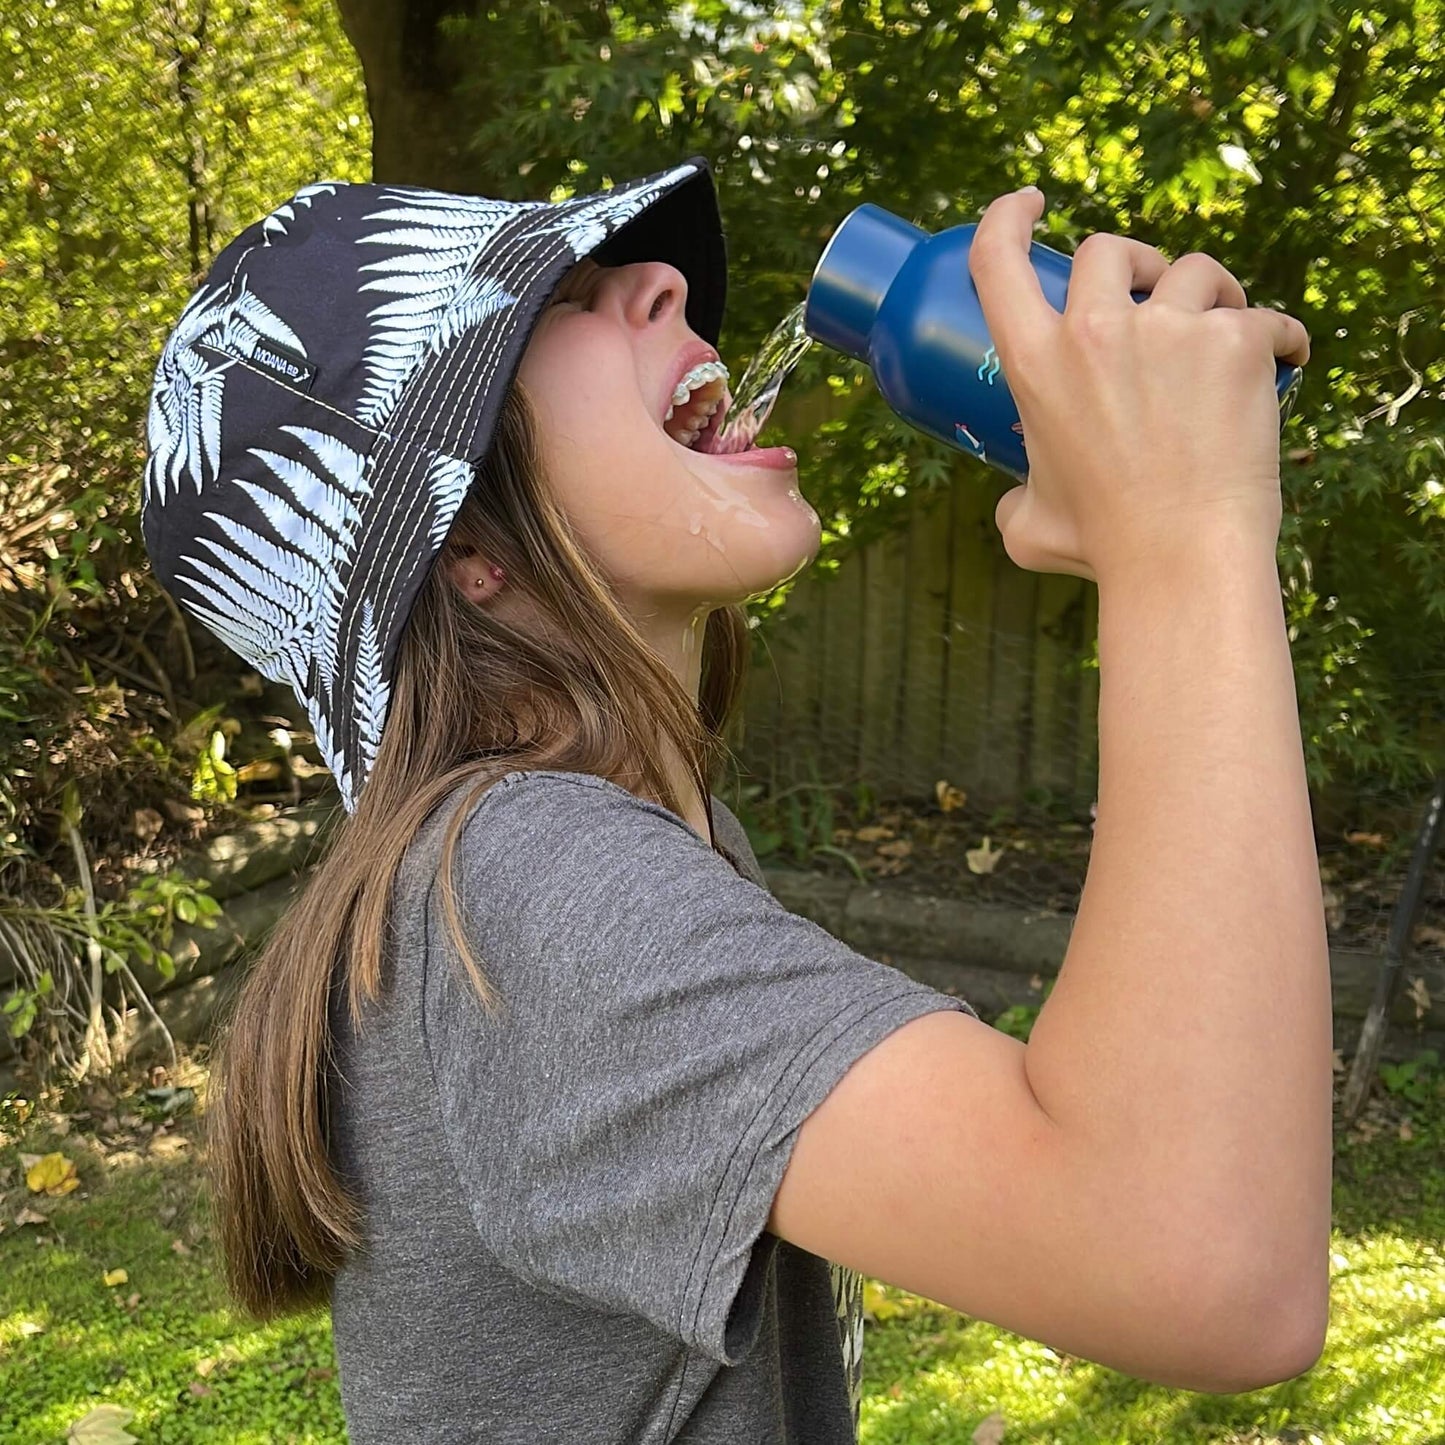 Young girl pouring water from a drink bottle into her mouth.